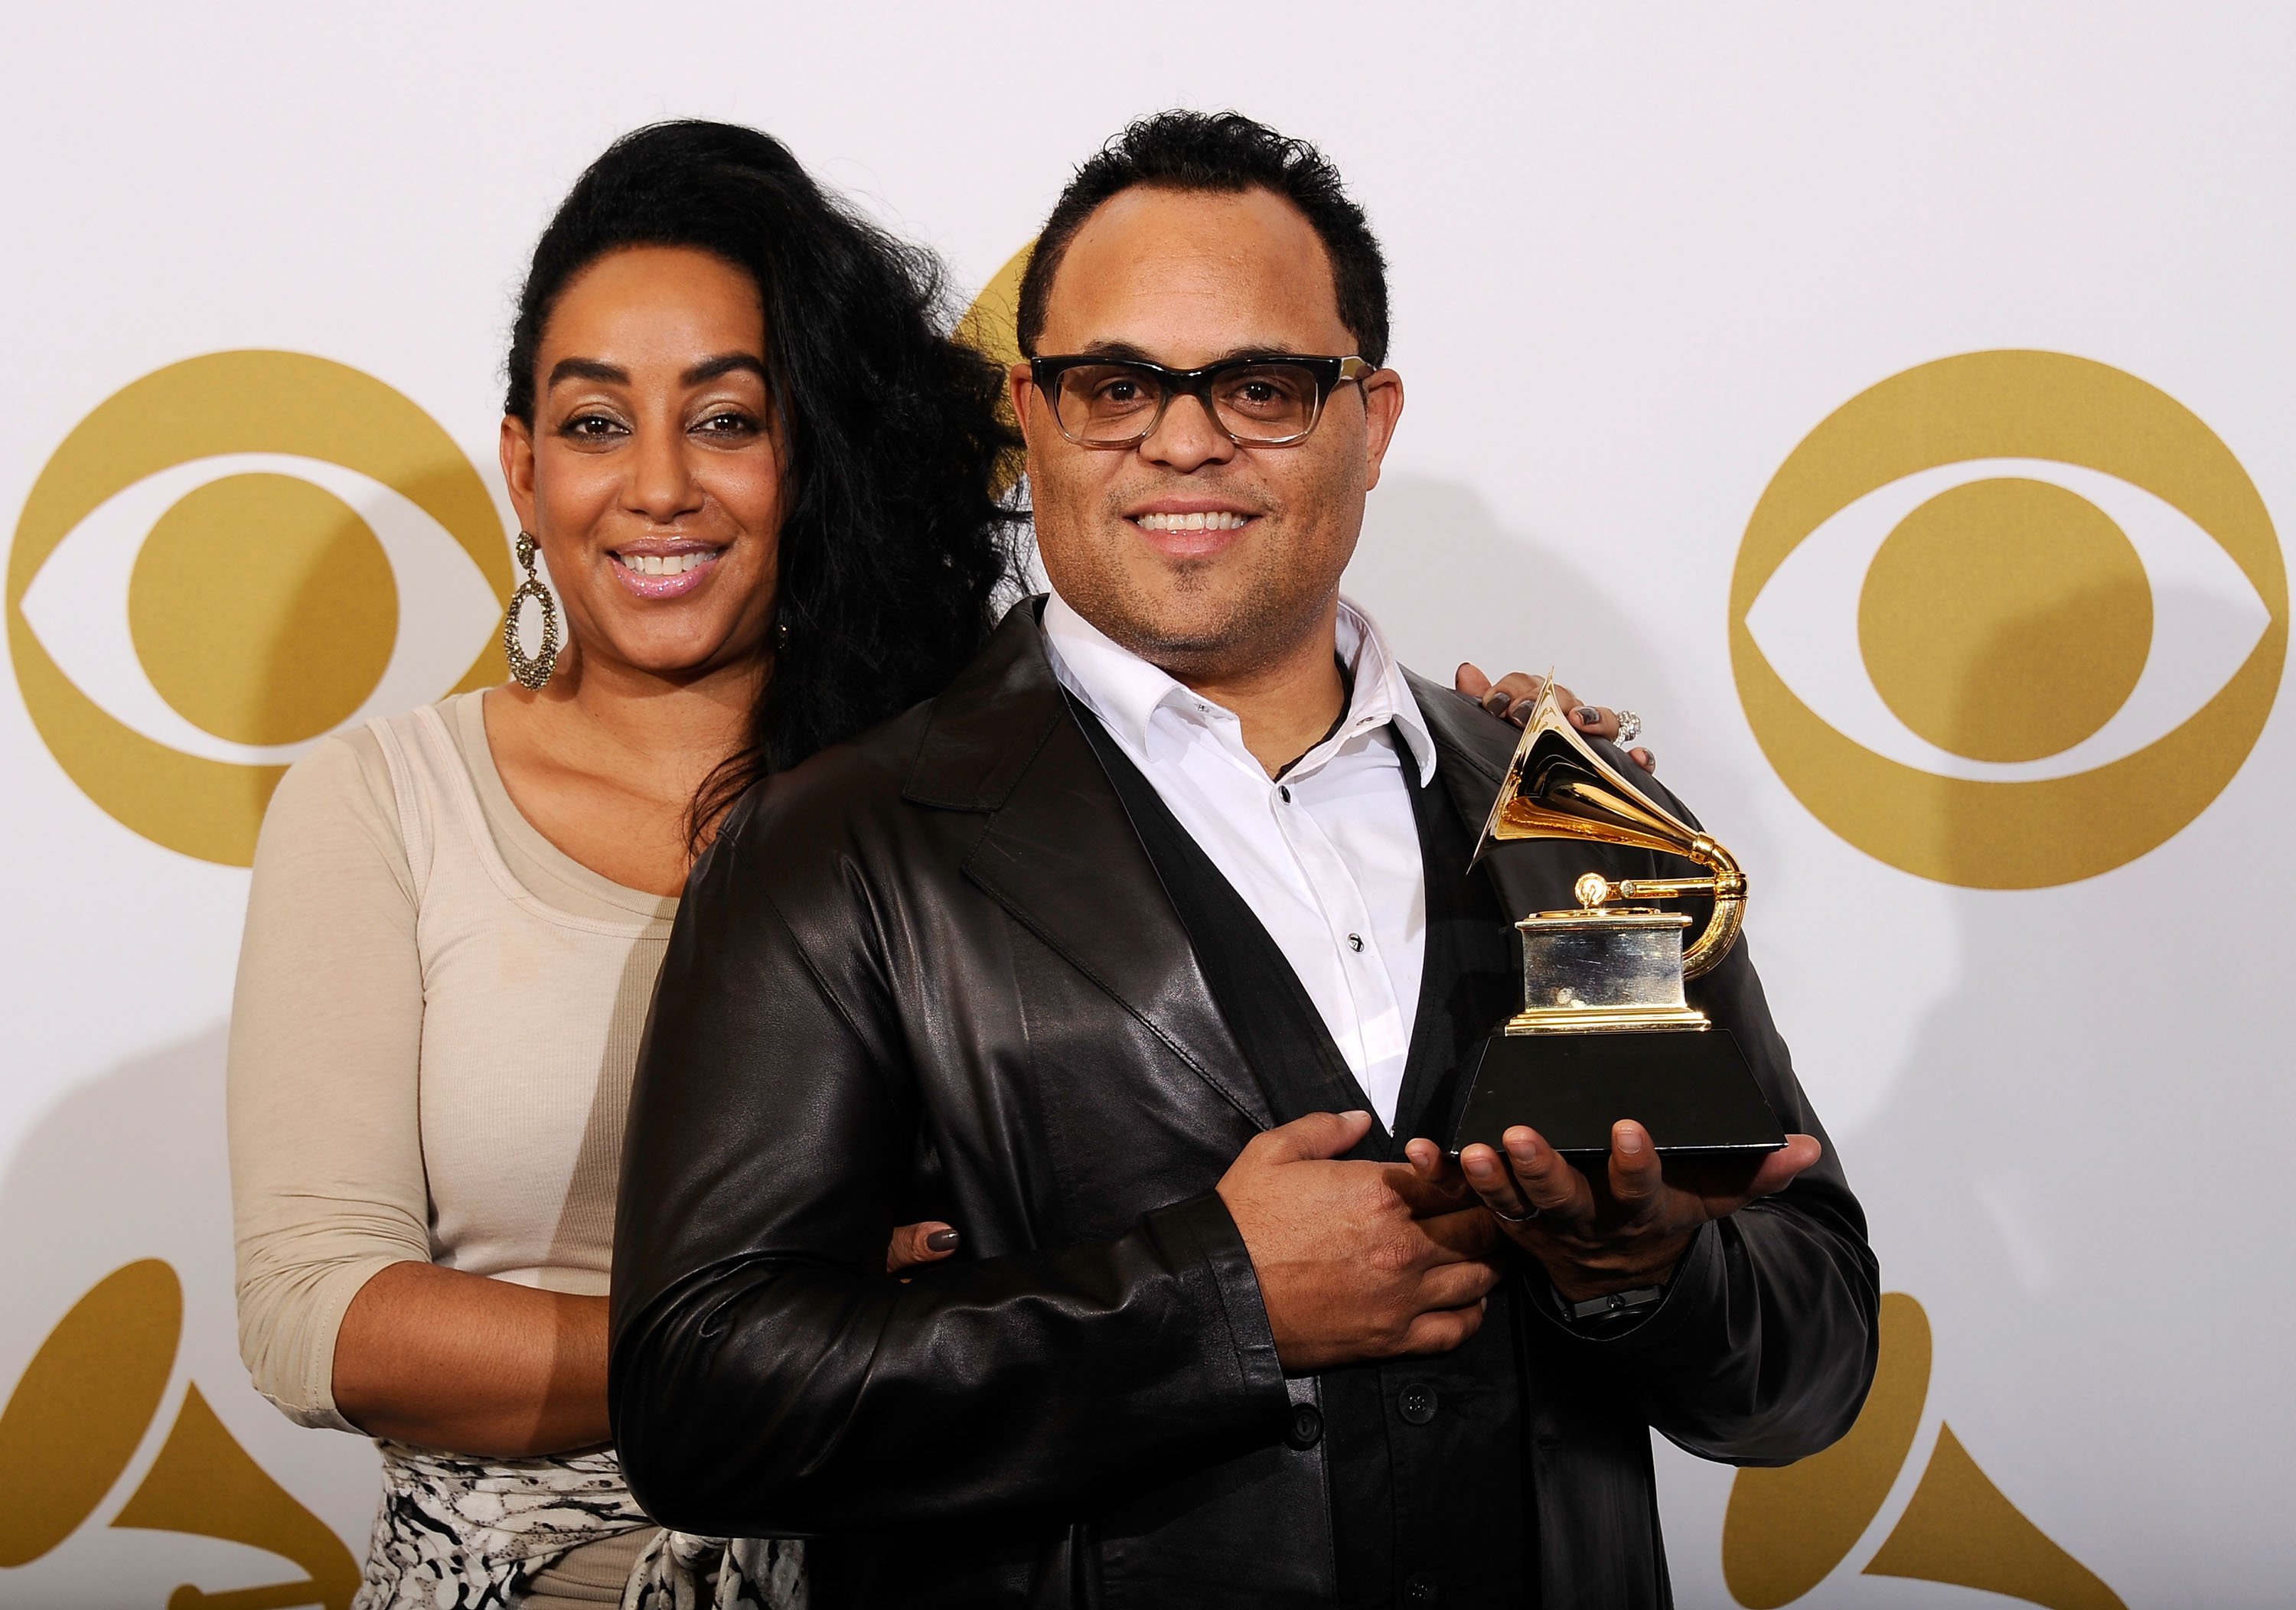 Israel houghton and wife in a threesome